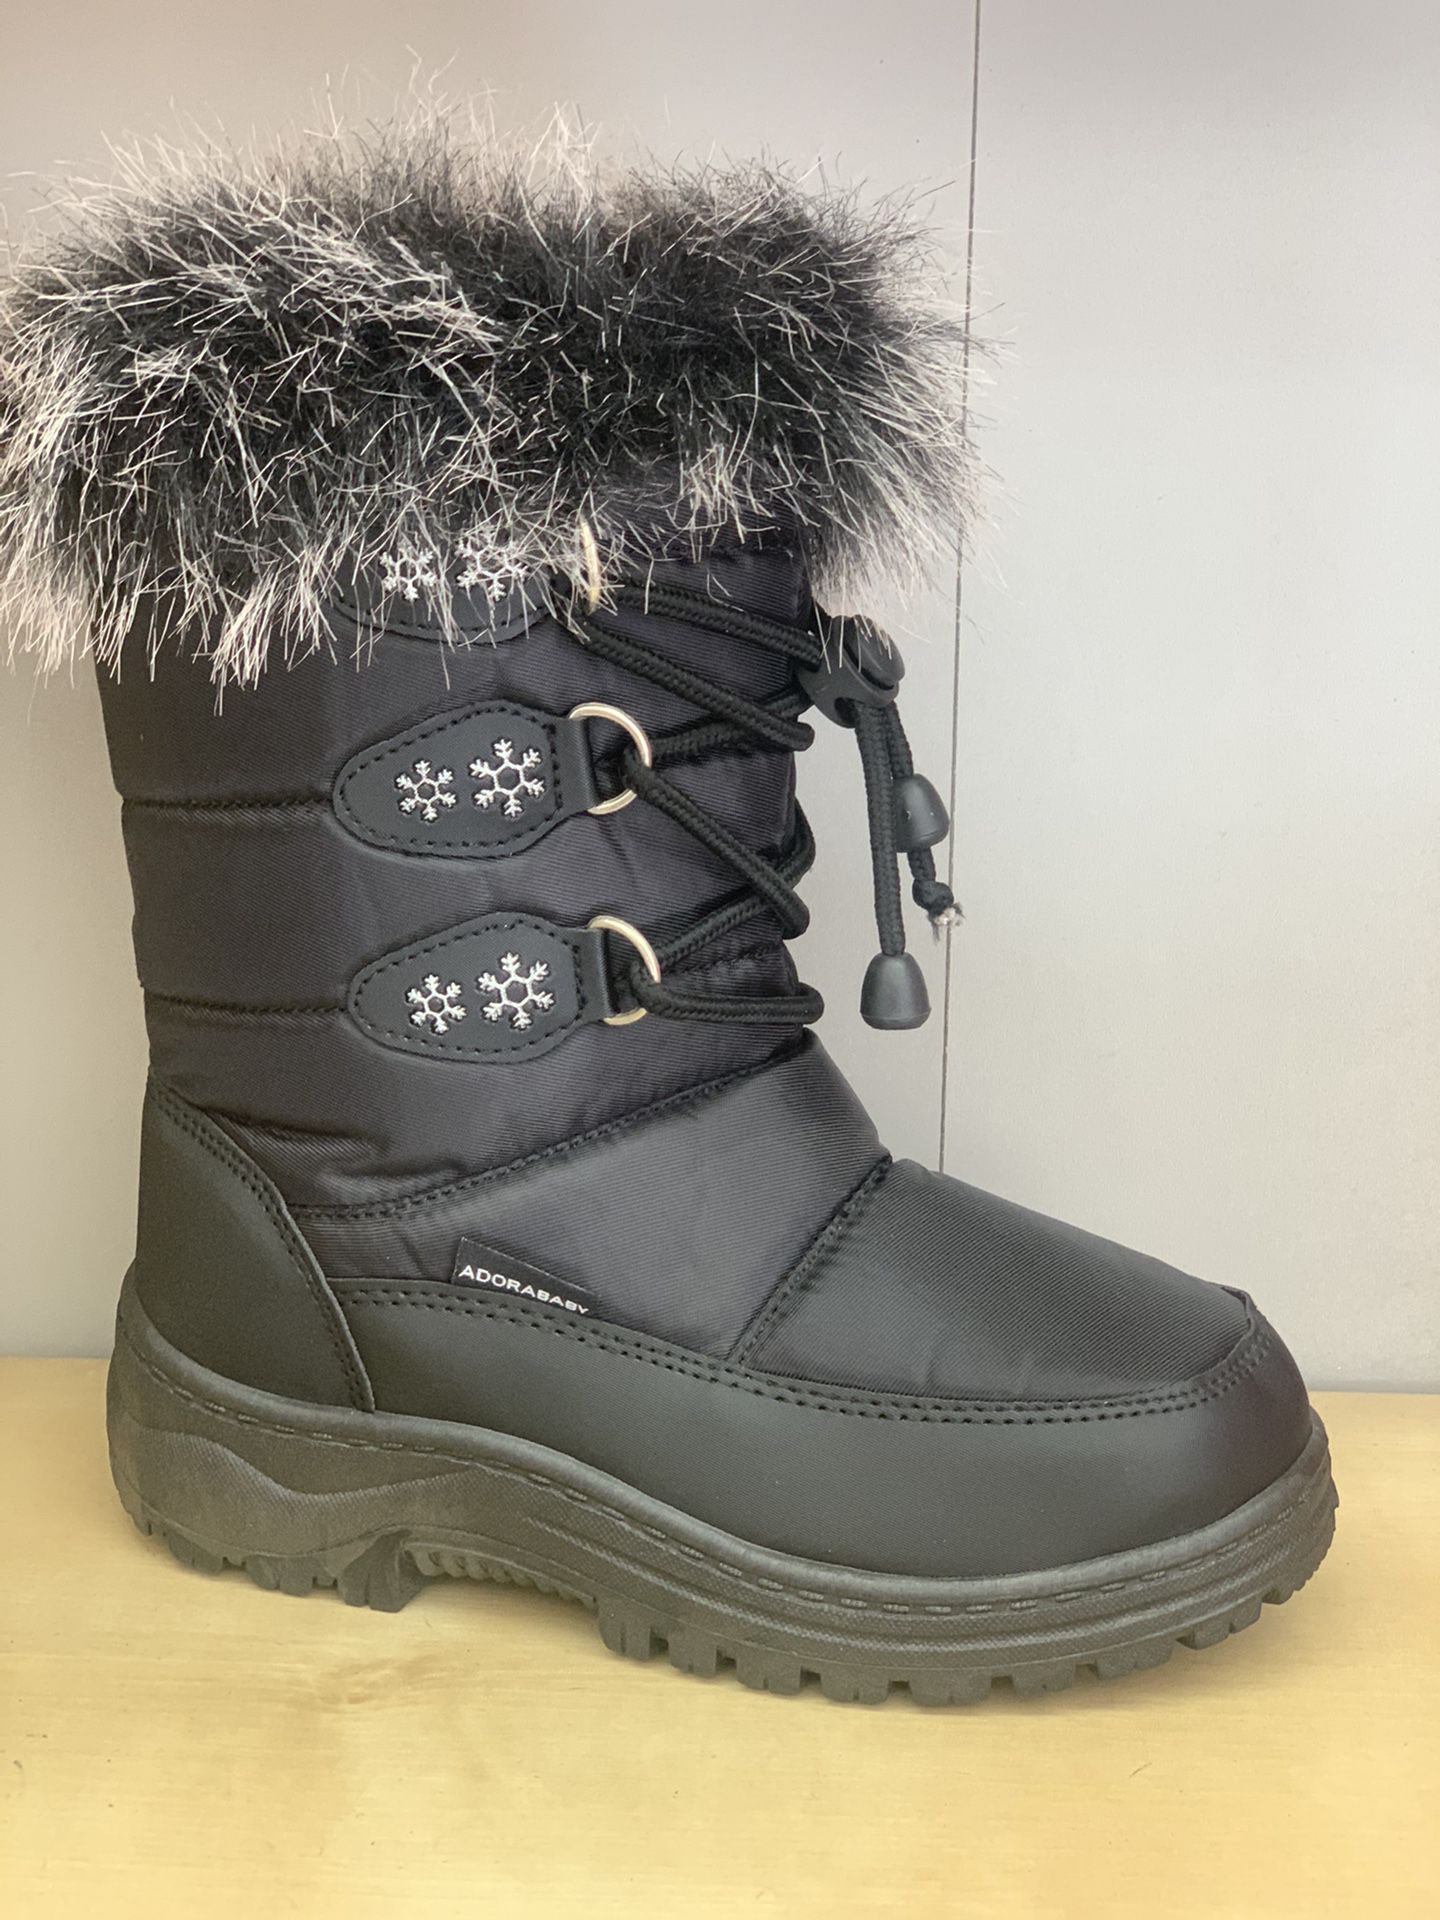 Snow boots for kids girls size 2,3 4 kids sizes